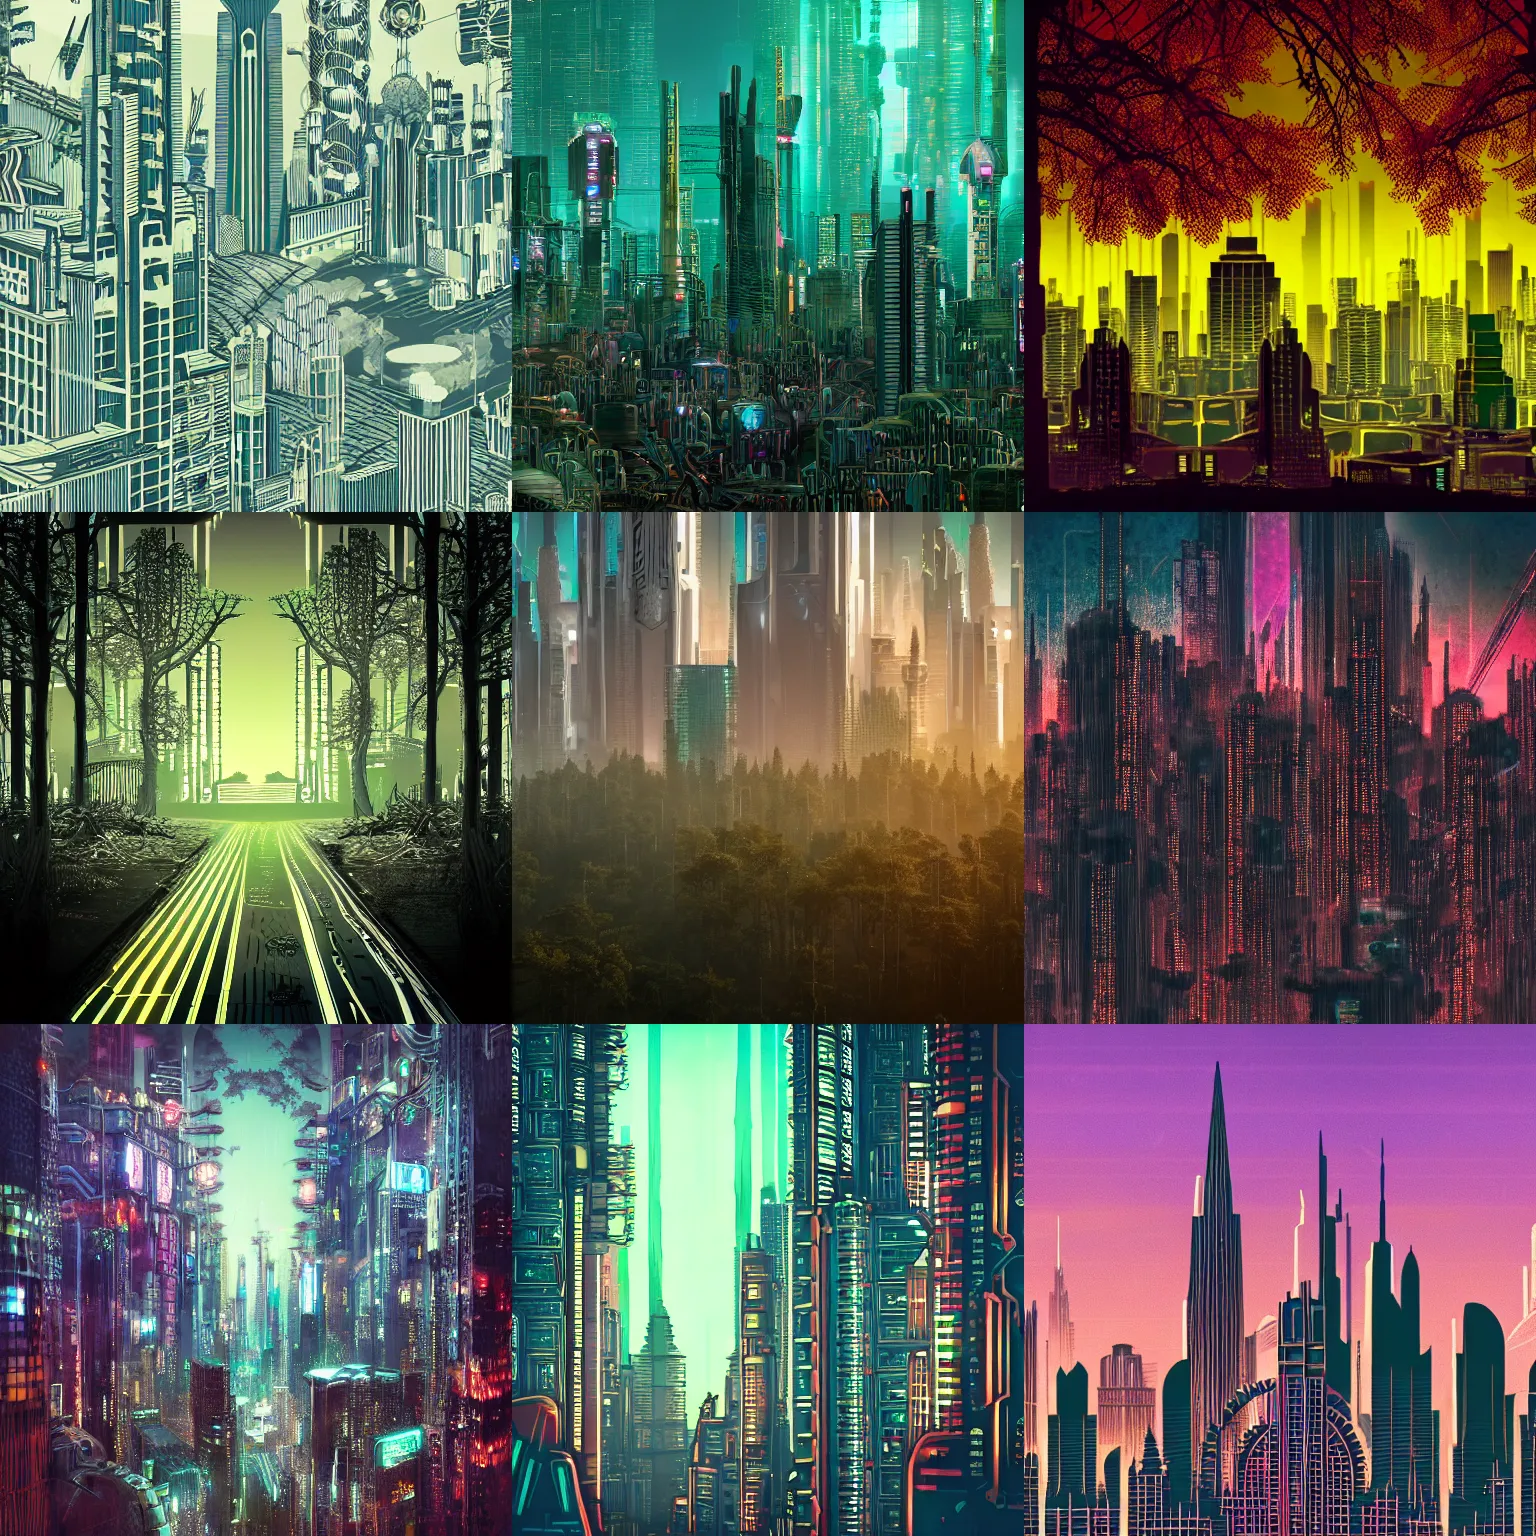 Prompt: detailed photo of a beautiful cyberpunk Art Deco skyline containing a forest